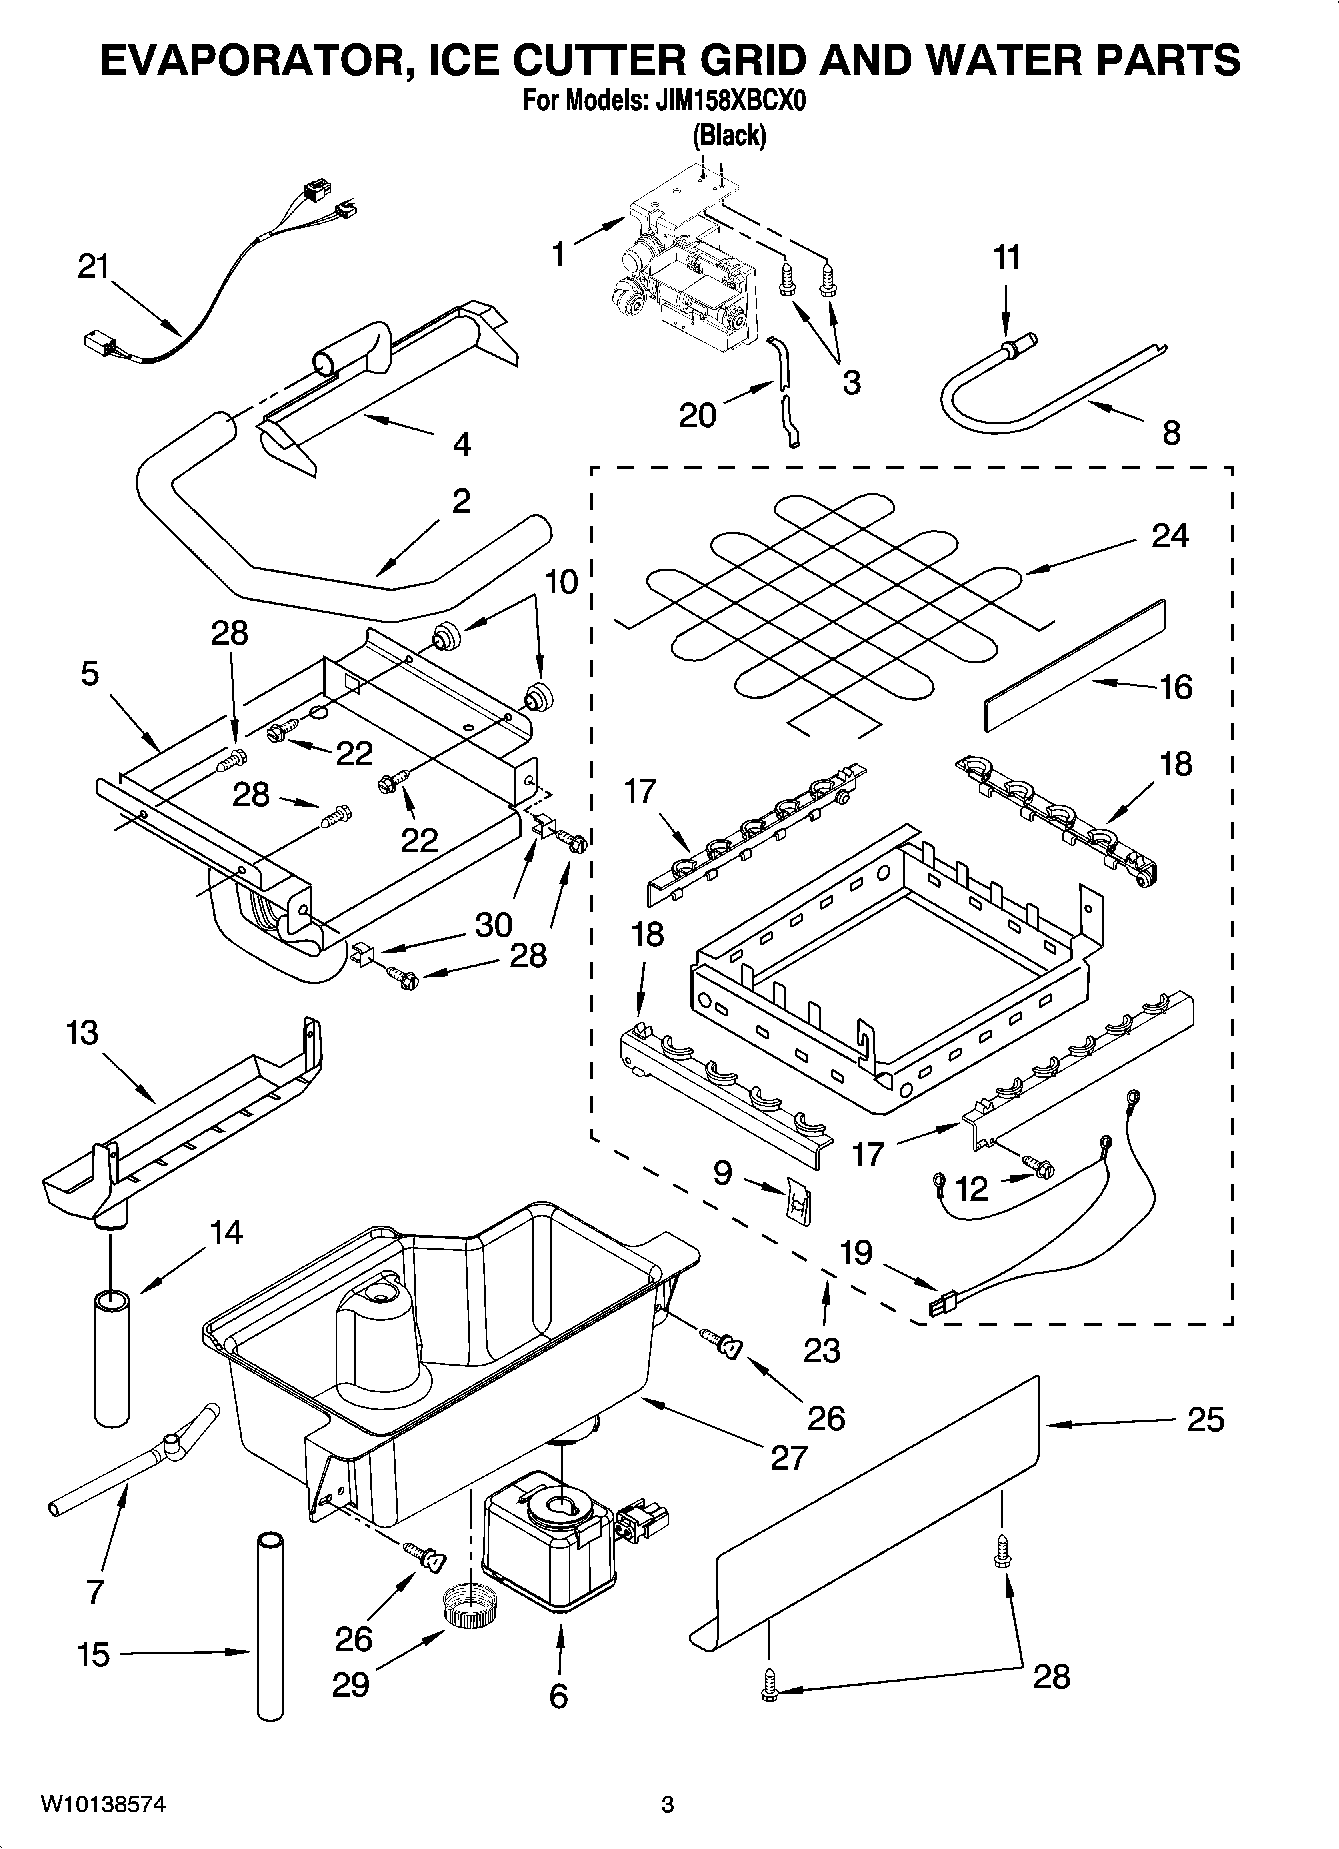 02 - EVAPORATOR, ICE CUTTER GRID AND WATER PARTS